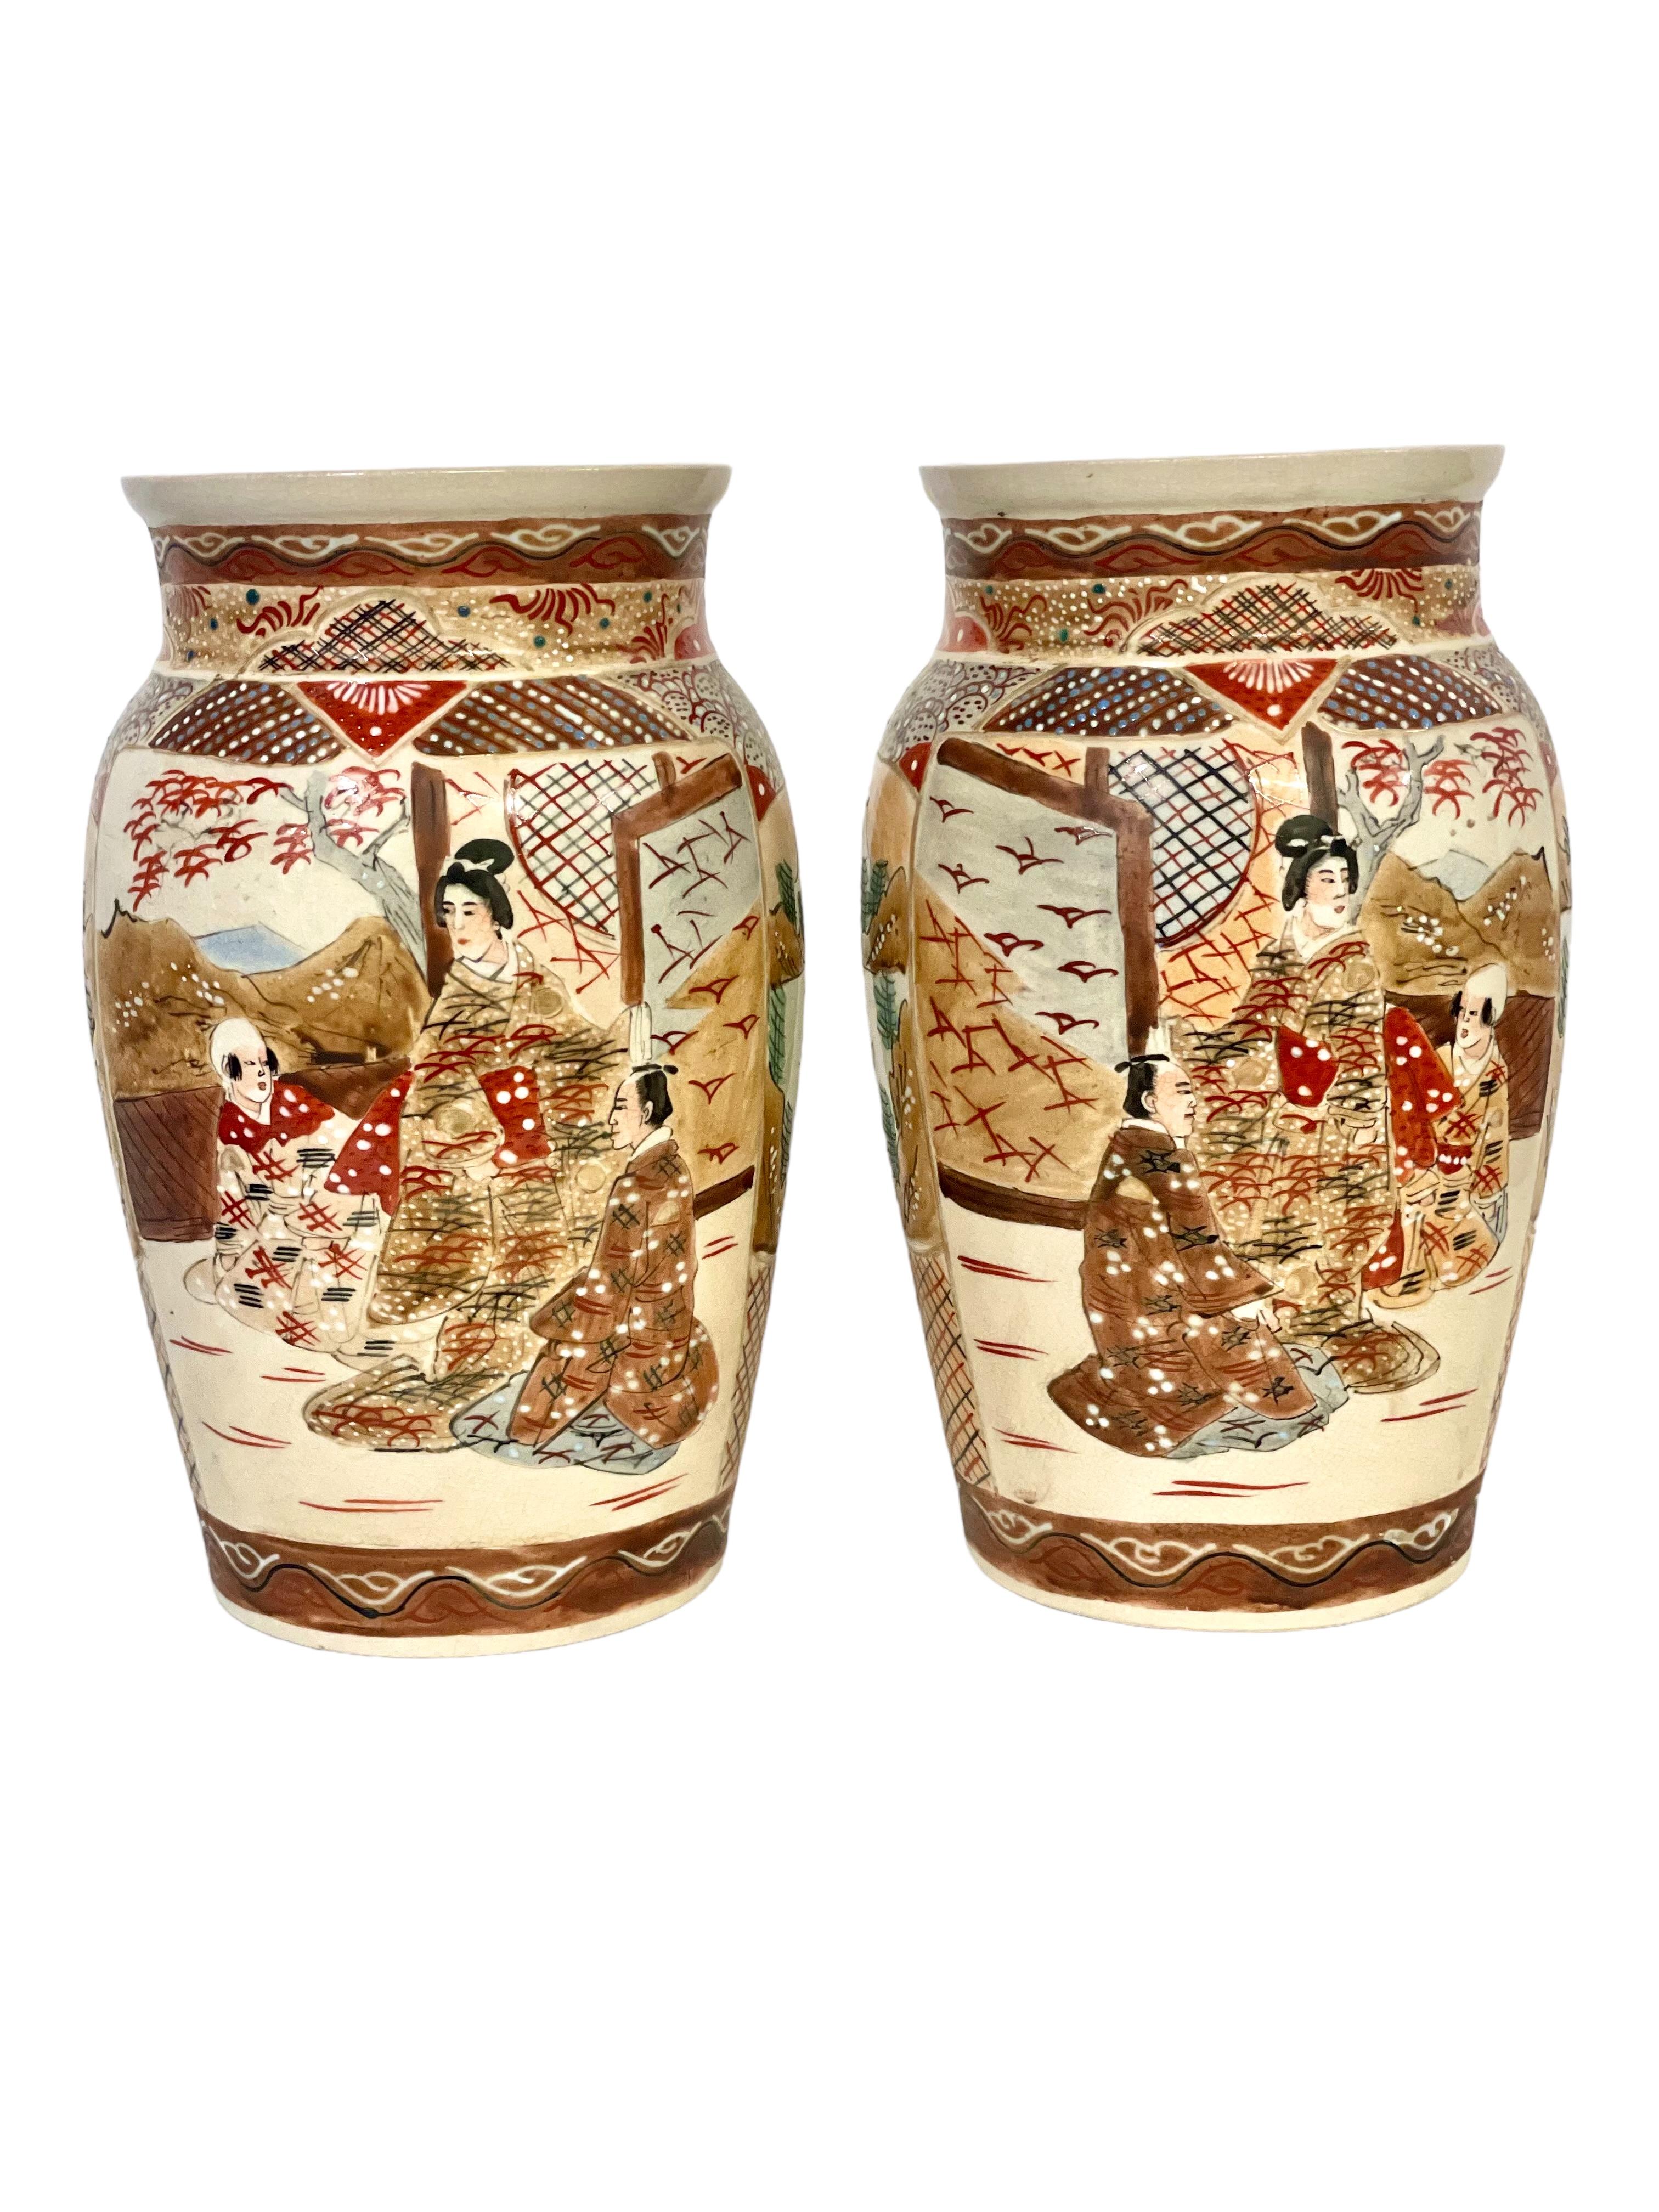 A fine pair of Japanese Satsuma earthenware vases, ornately decorated in typical Satsuma colours with enamels and heavy gilding. The designs on the bodies of these late 19th century or early 20th century shouldered vases feature traditional figural